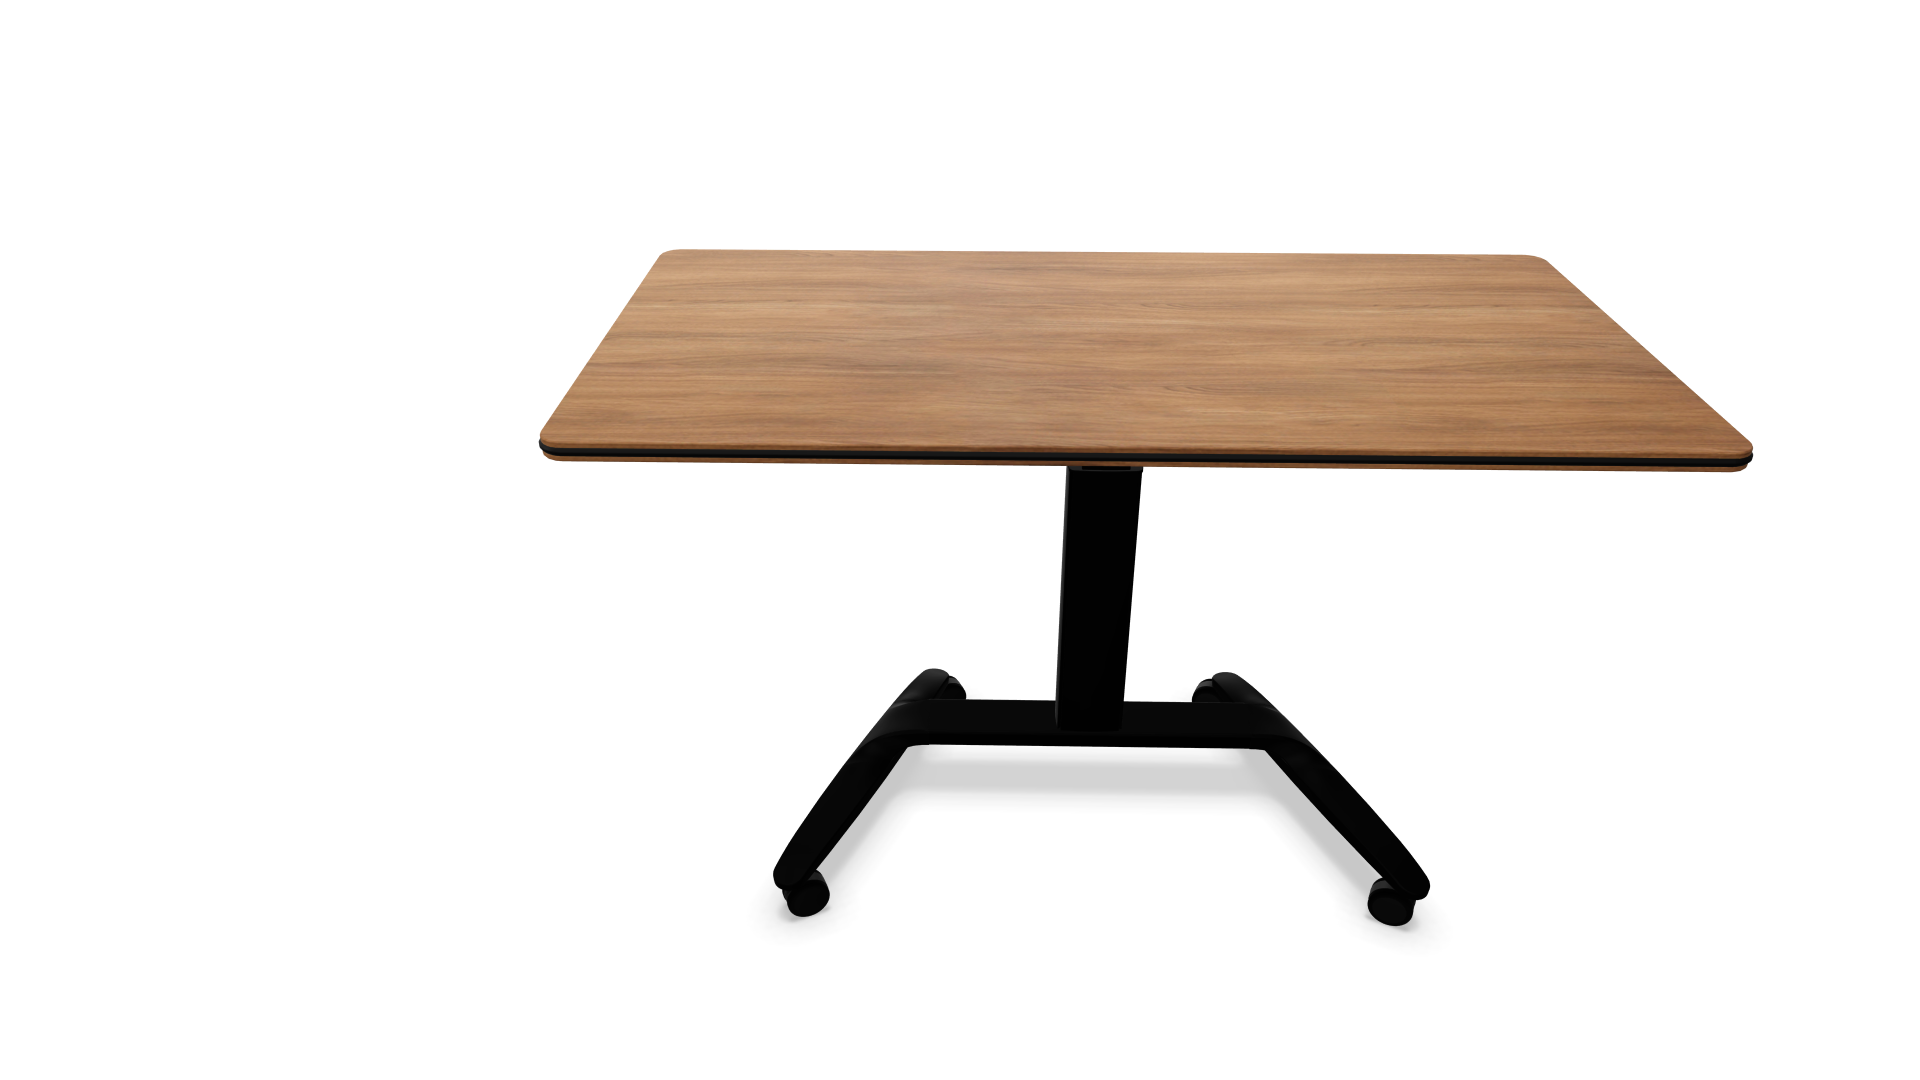 Talent Series 500 Flip-Top Table with Adjustable Height